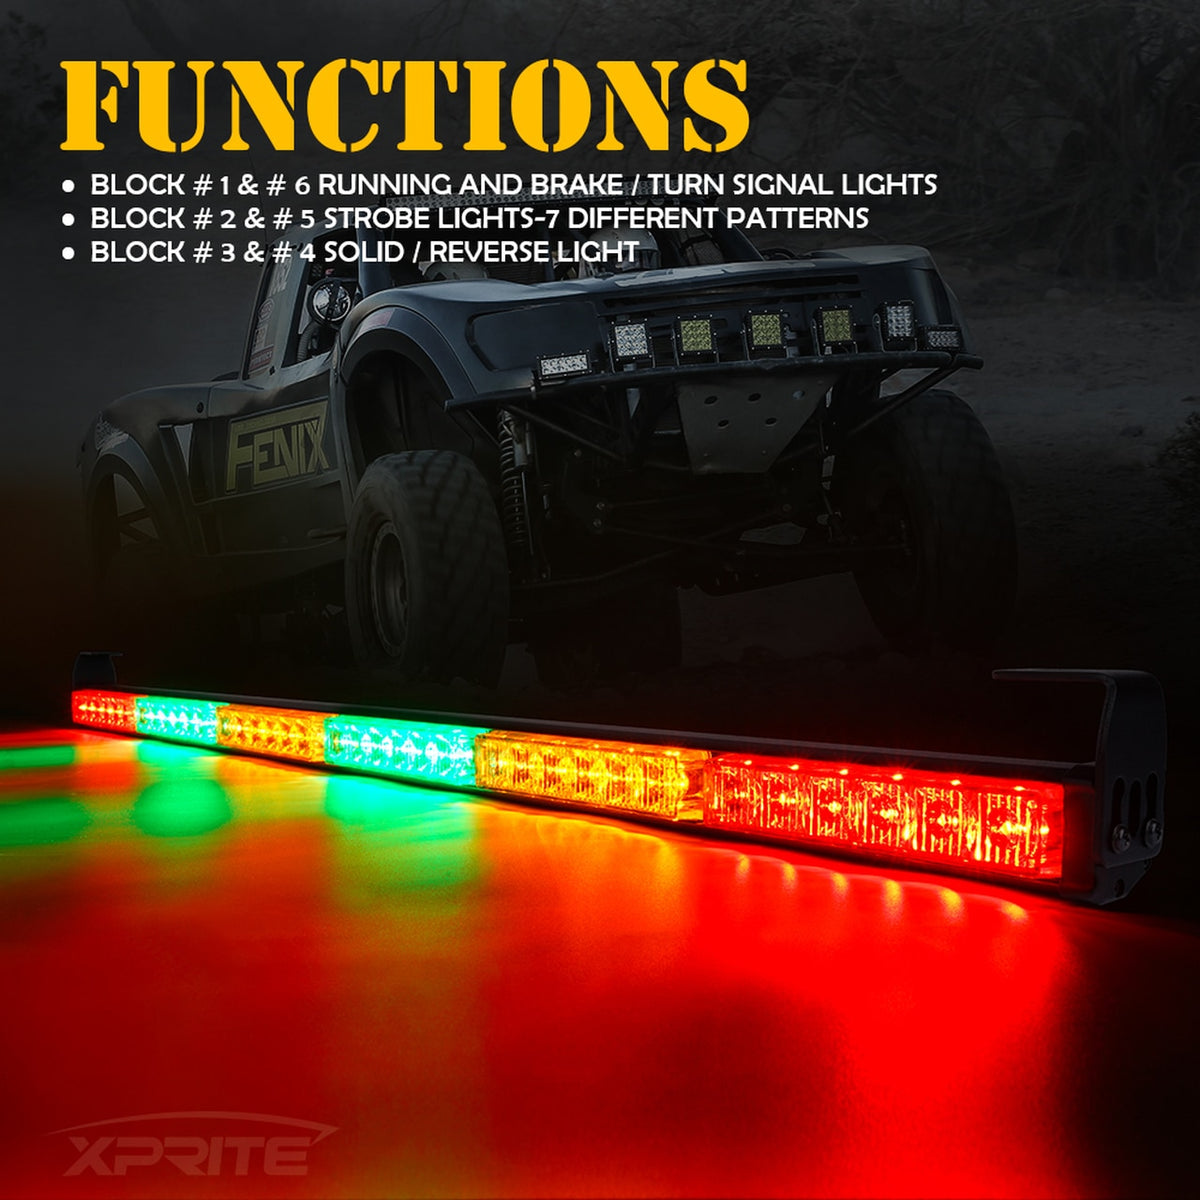 Xprite RZ Series 36 Offroad Rear Chase LED Strobe Lightbar - RYGYGR – The  Offroad Division